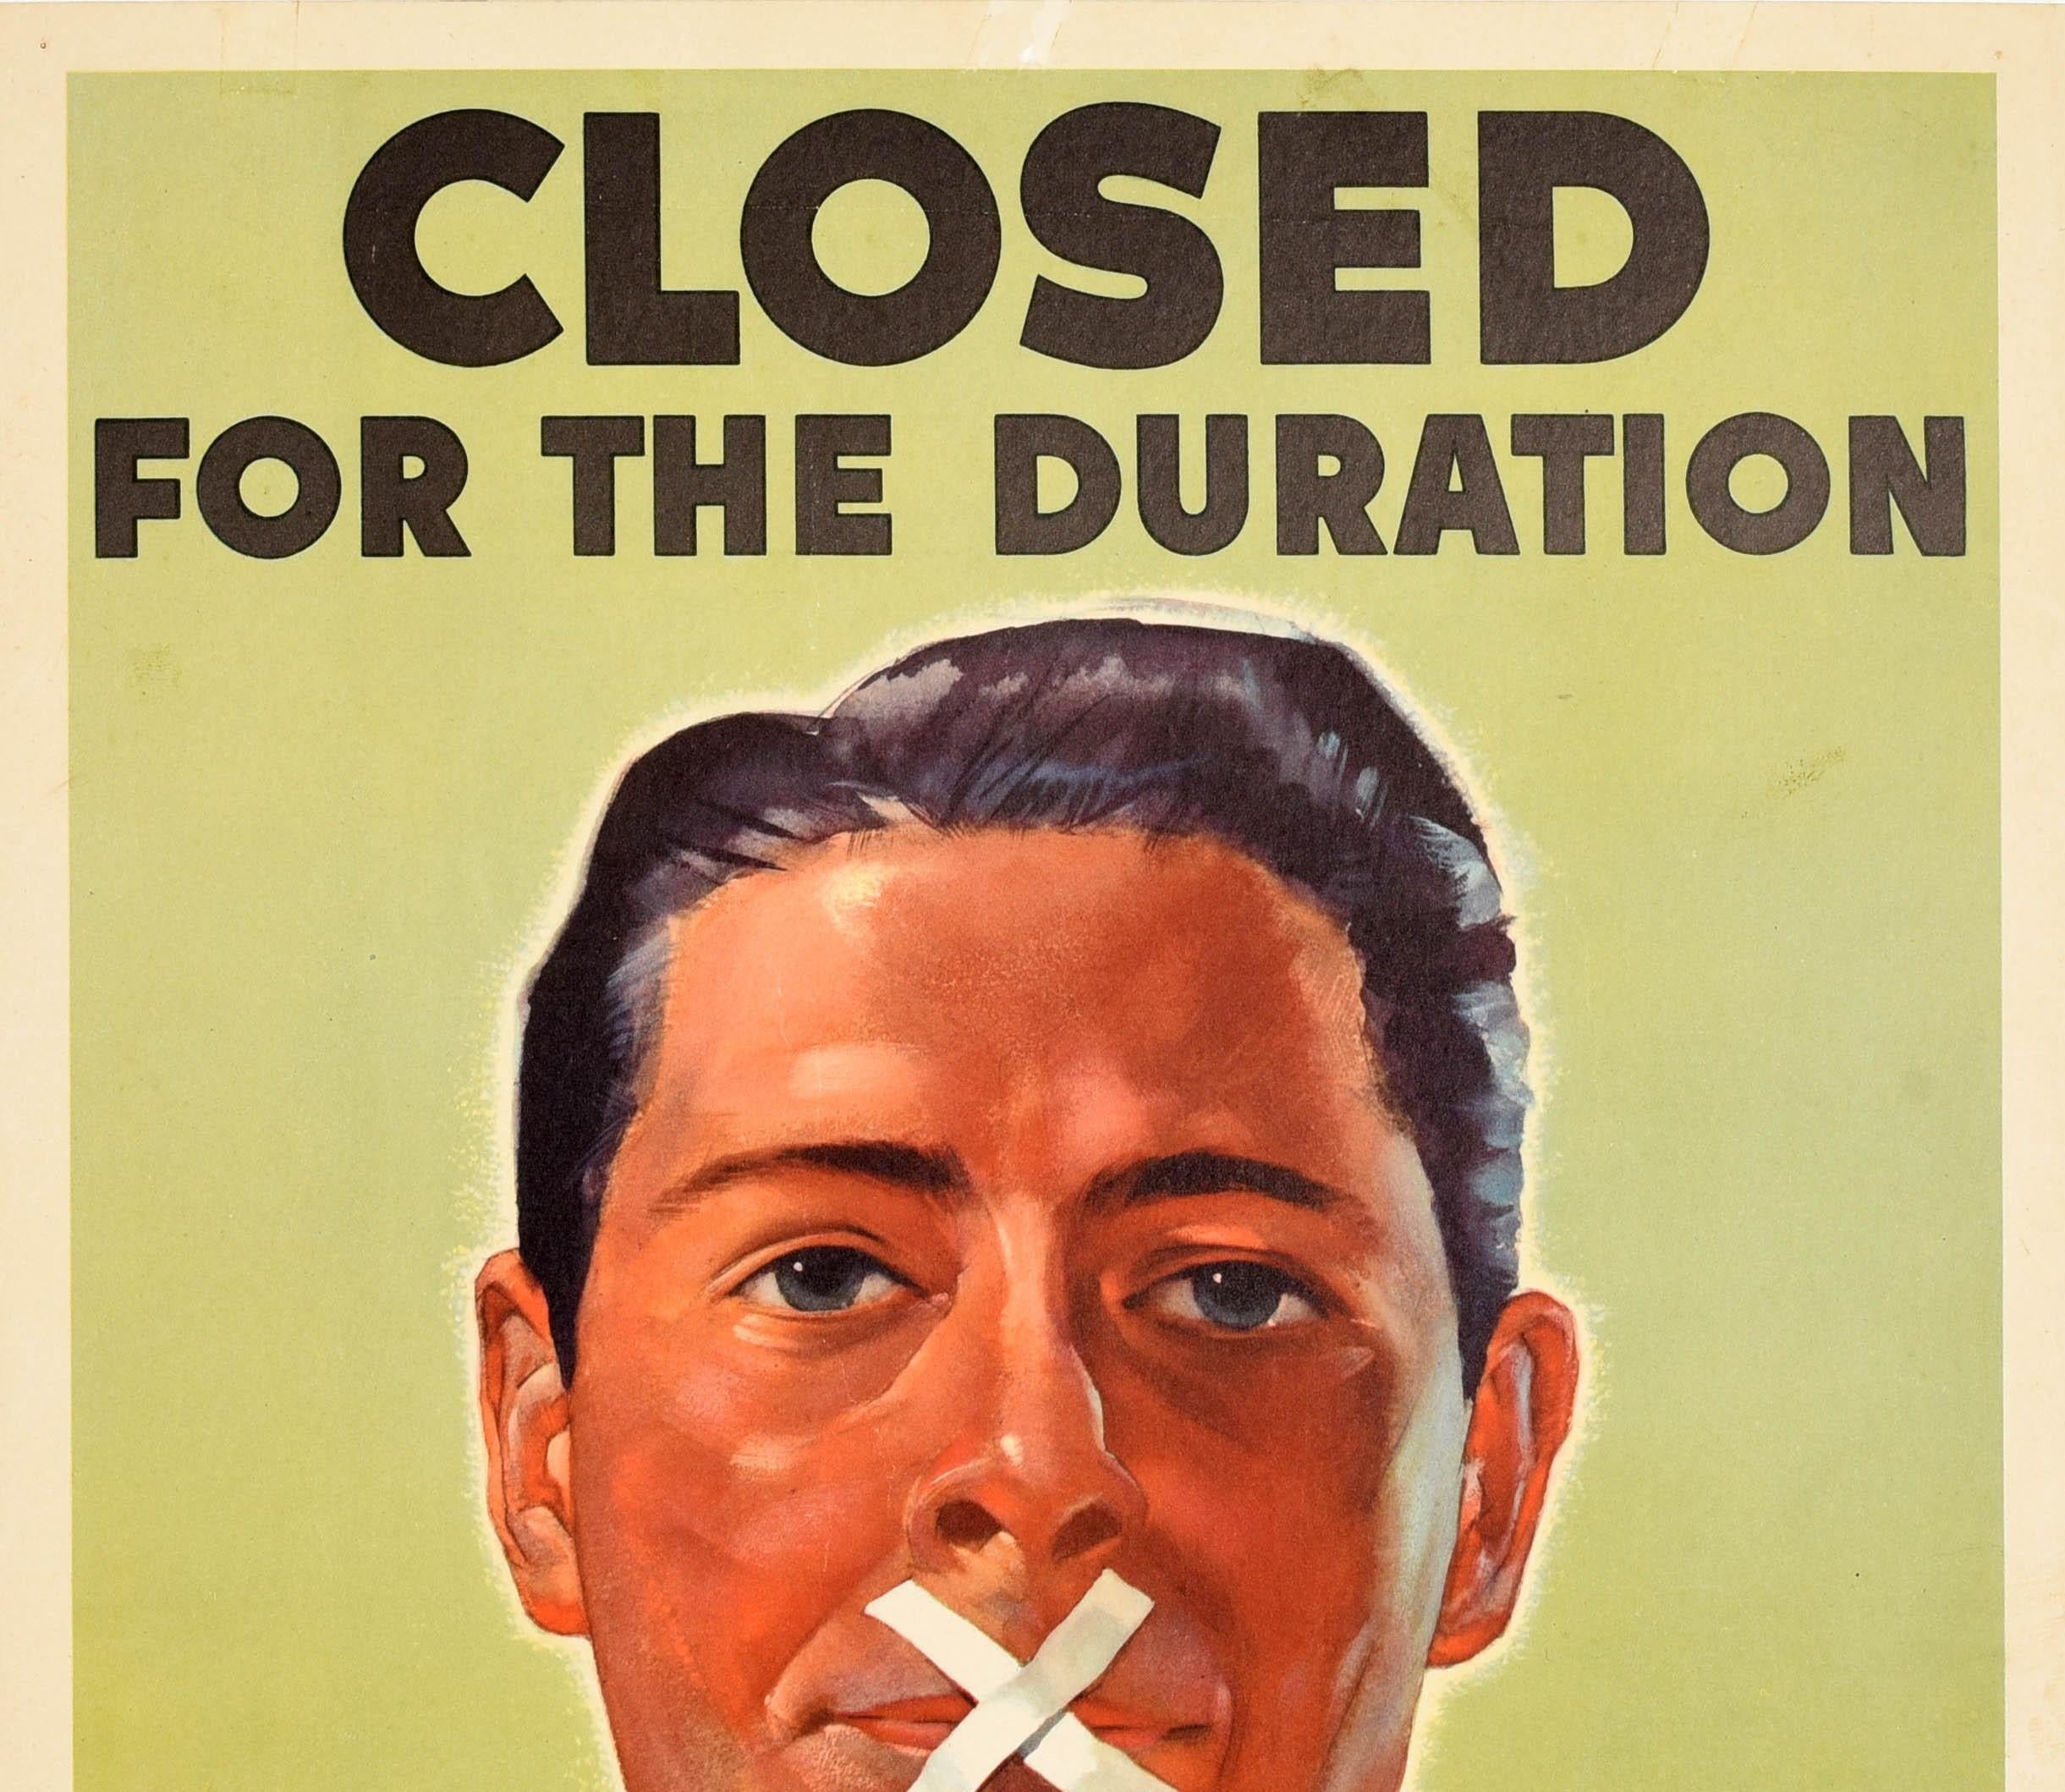 Original Vintage Poster Closed For The Duration Loose Talk Can Cost Lives WWII - Print by Howard Scott